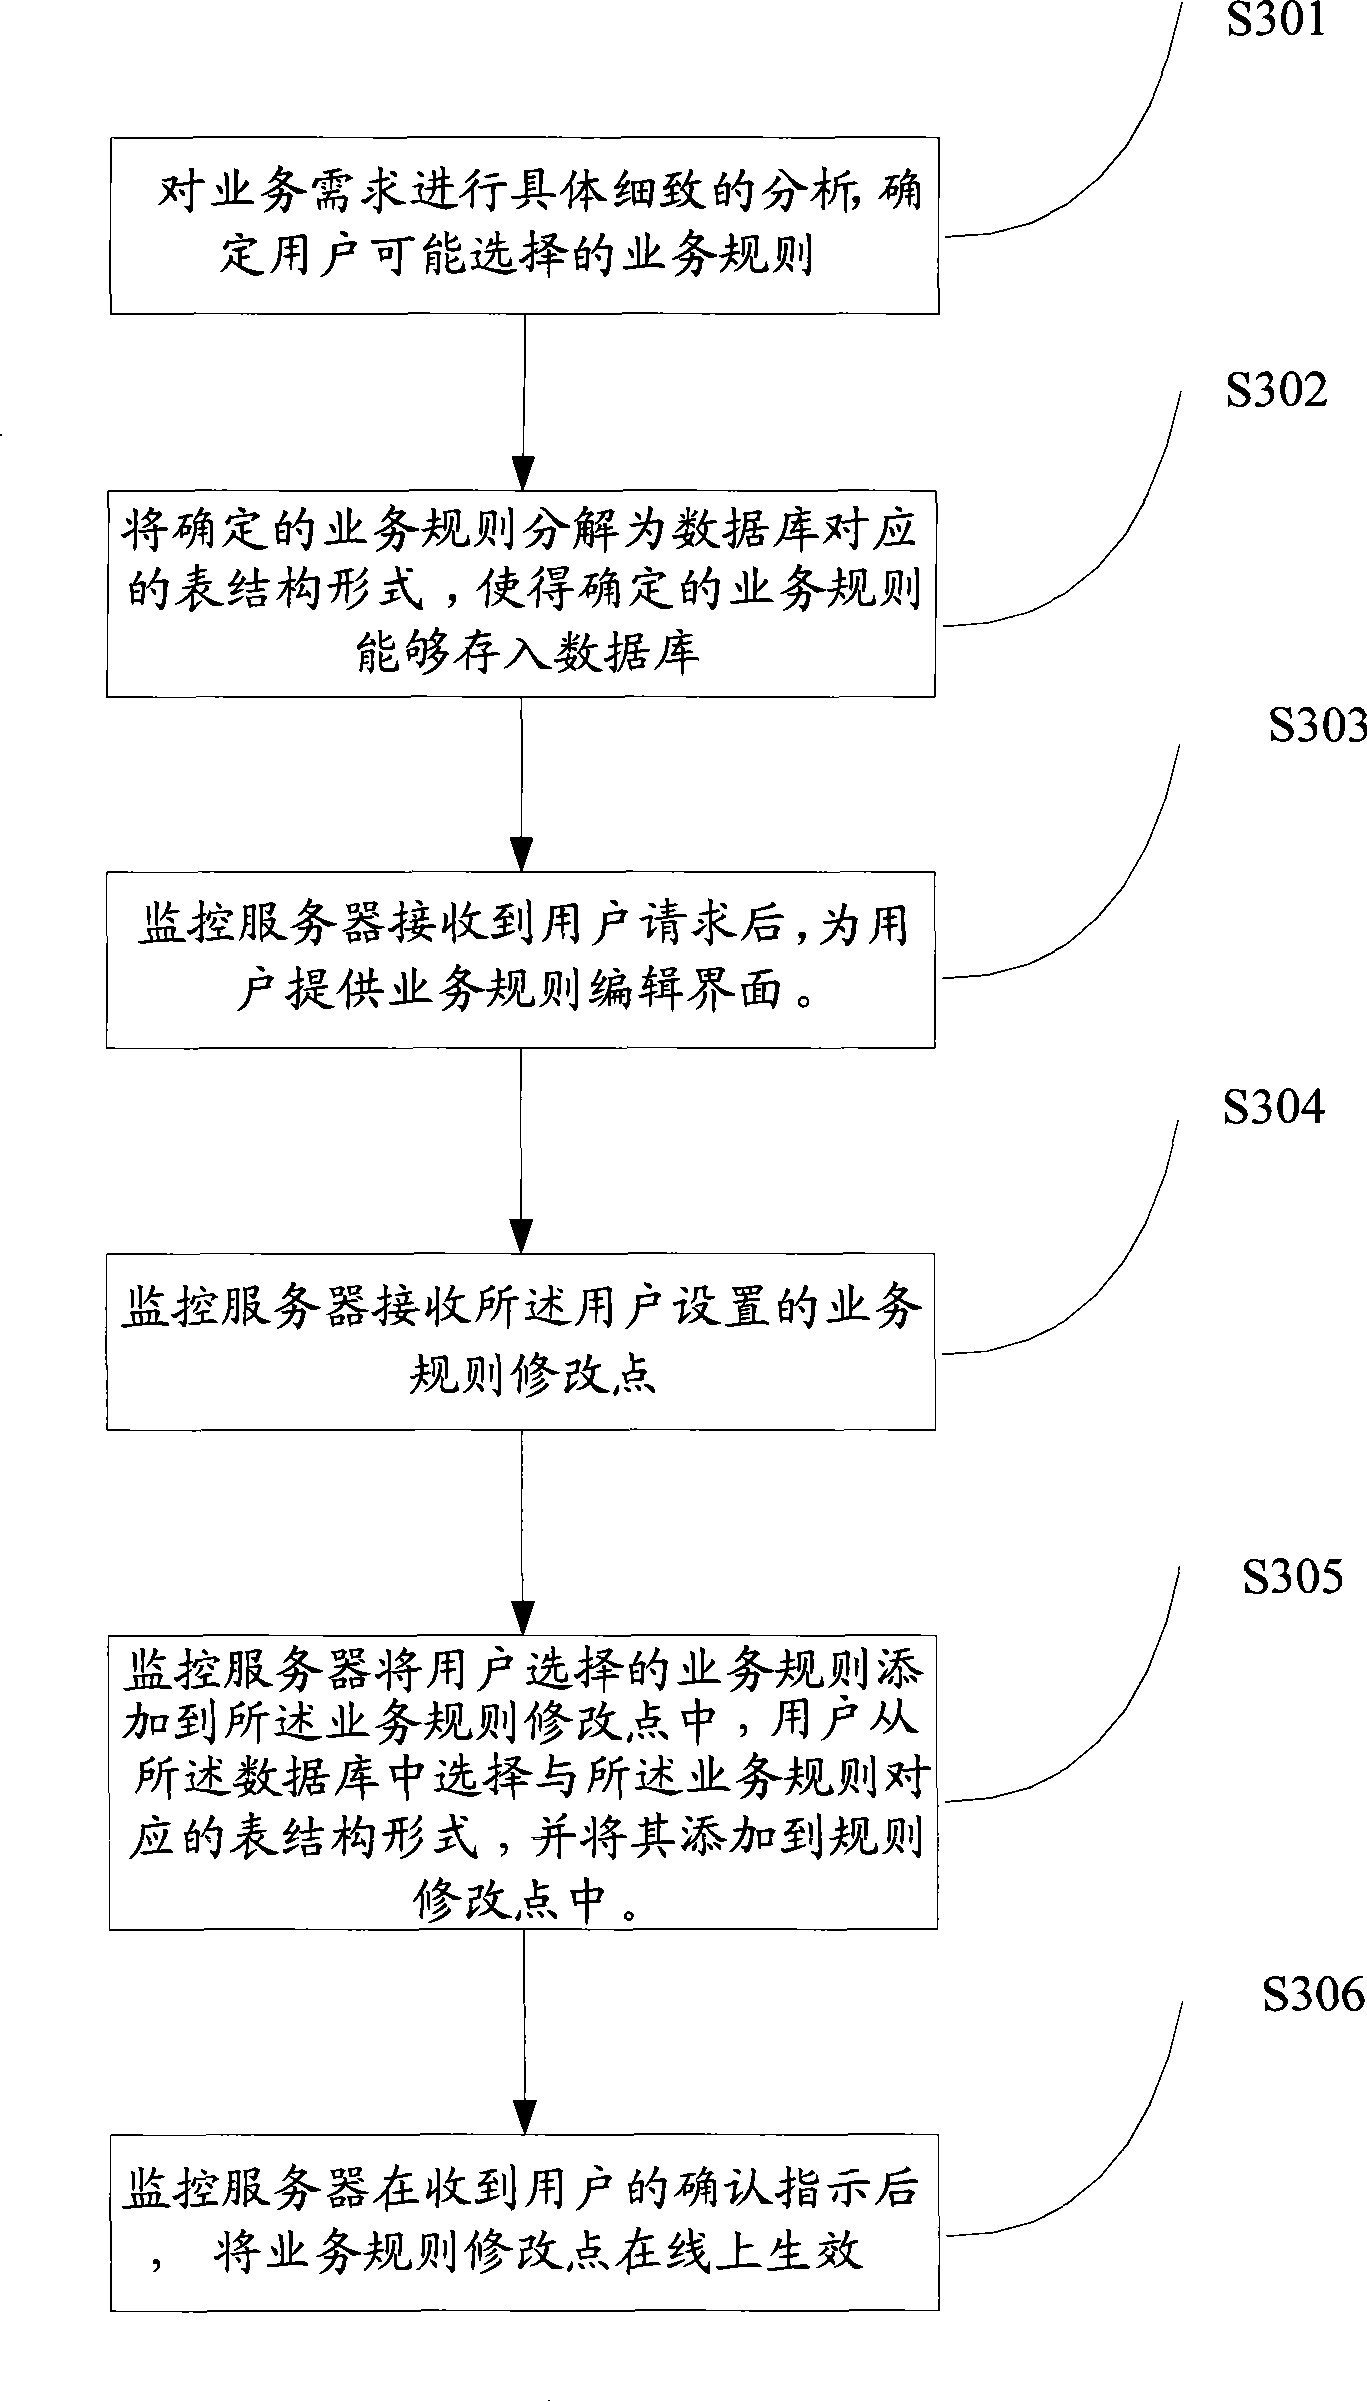 Dynamic service regulation application method, system and apparatus